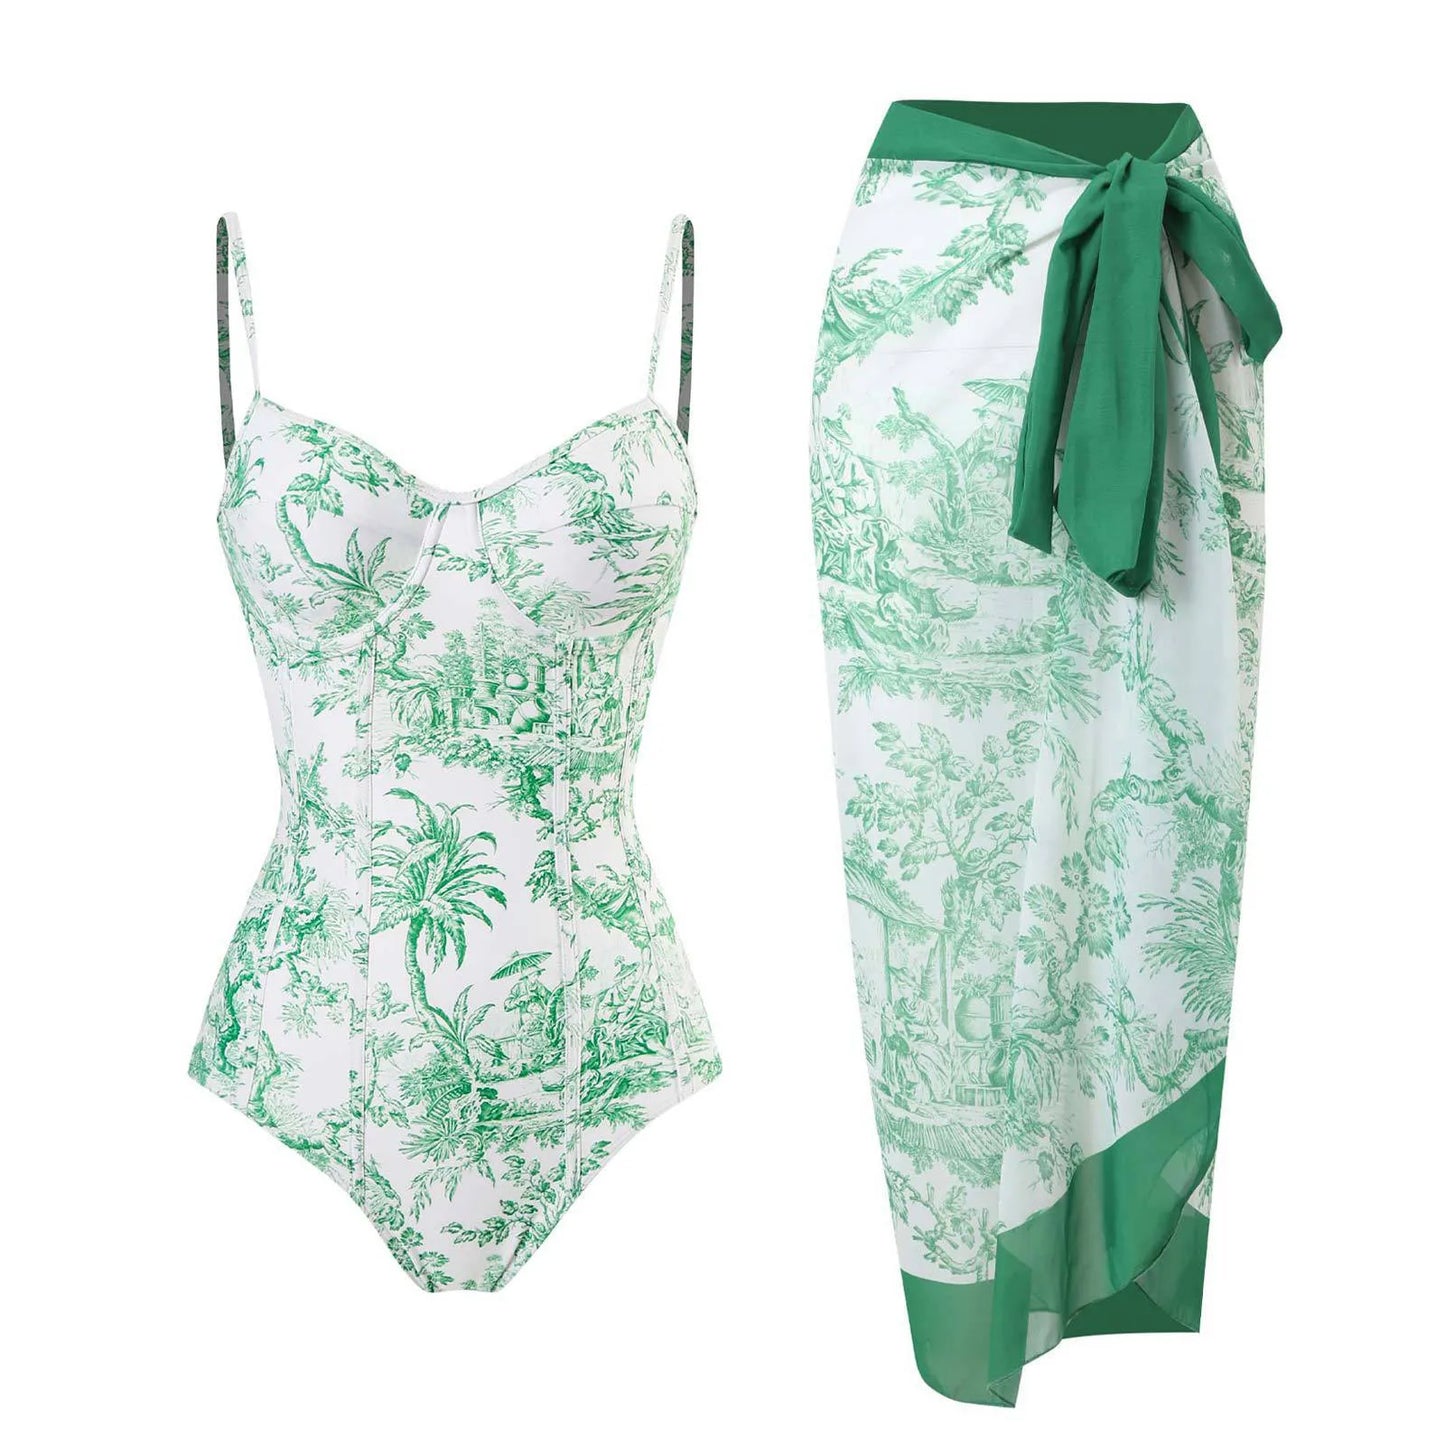 Get Ready for Summer with Our Floral Ruffle Bikini Set